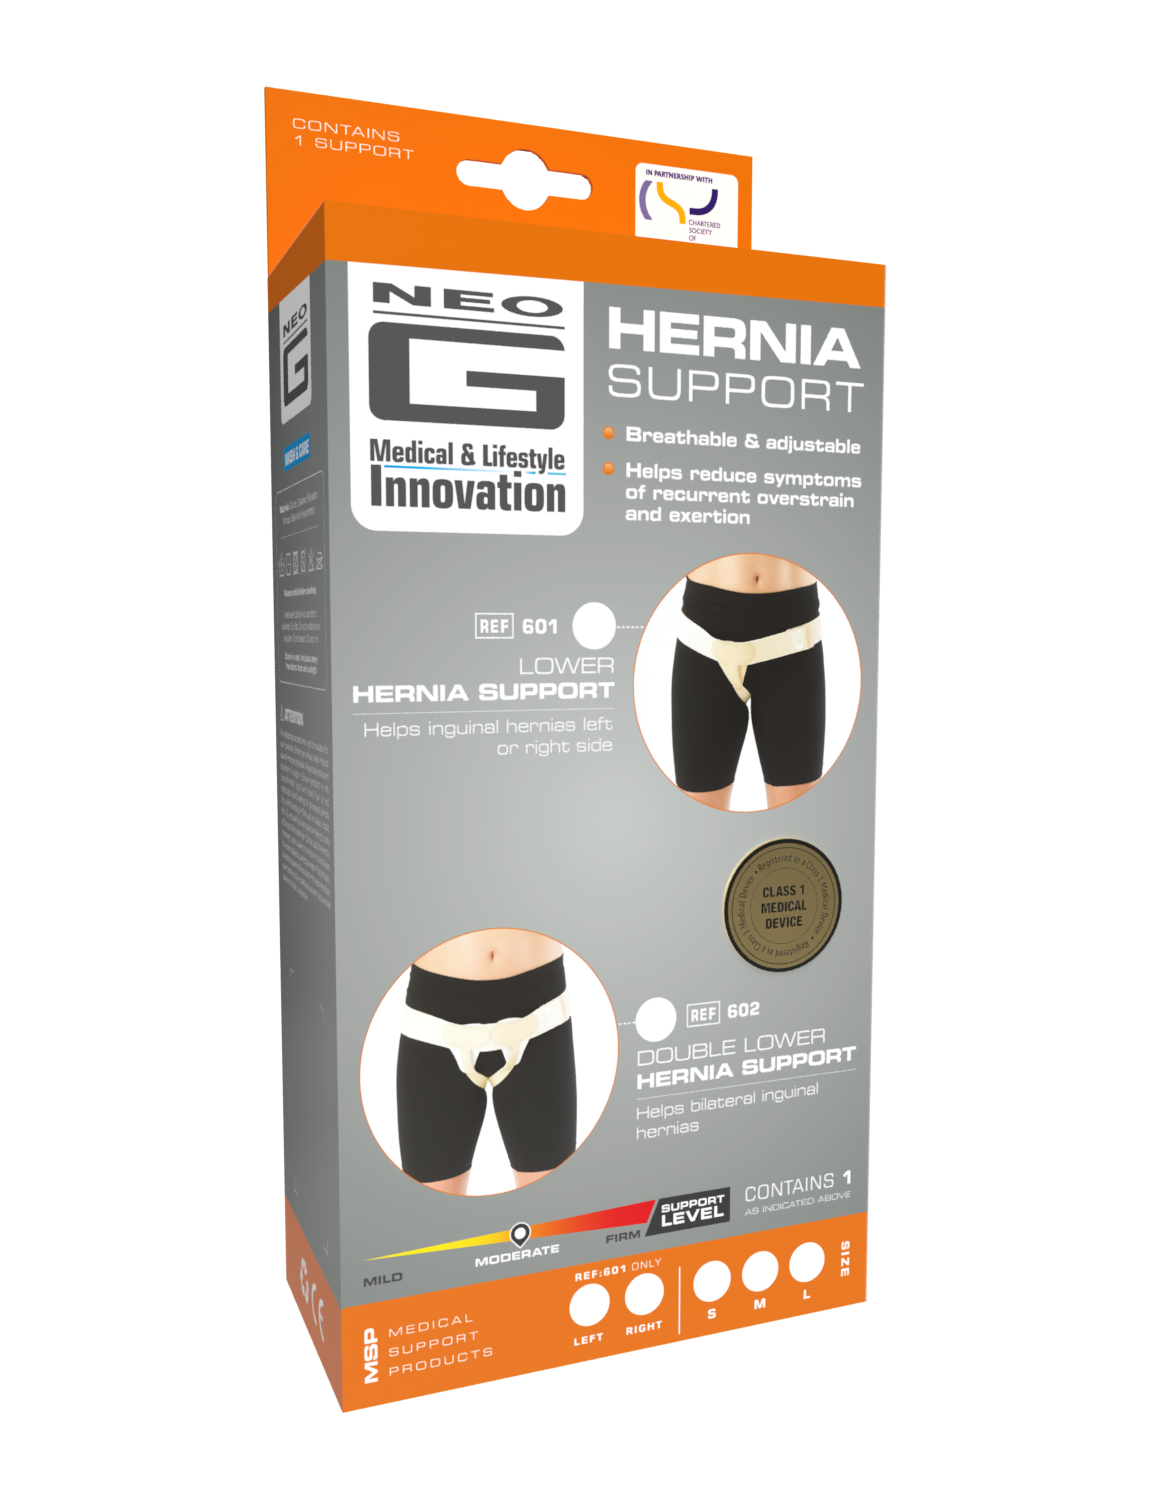 Double Inguinal Groin Hernia Reduction Support Belt Truss Brace